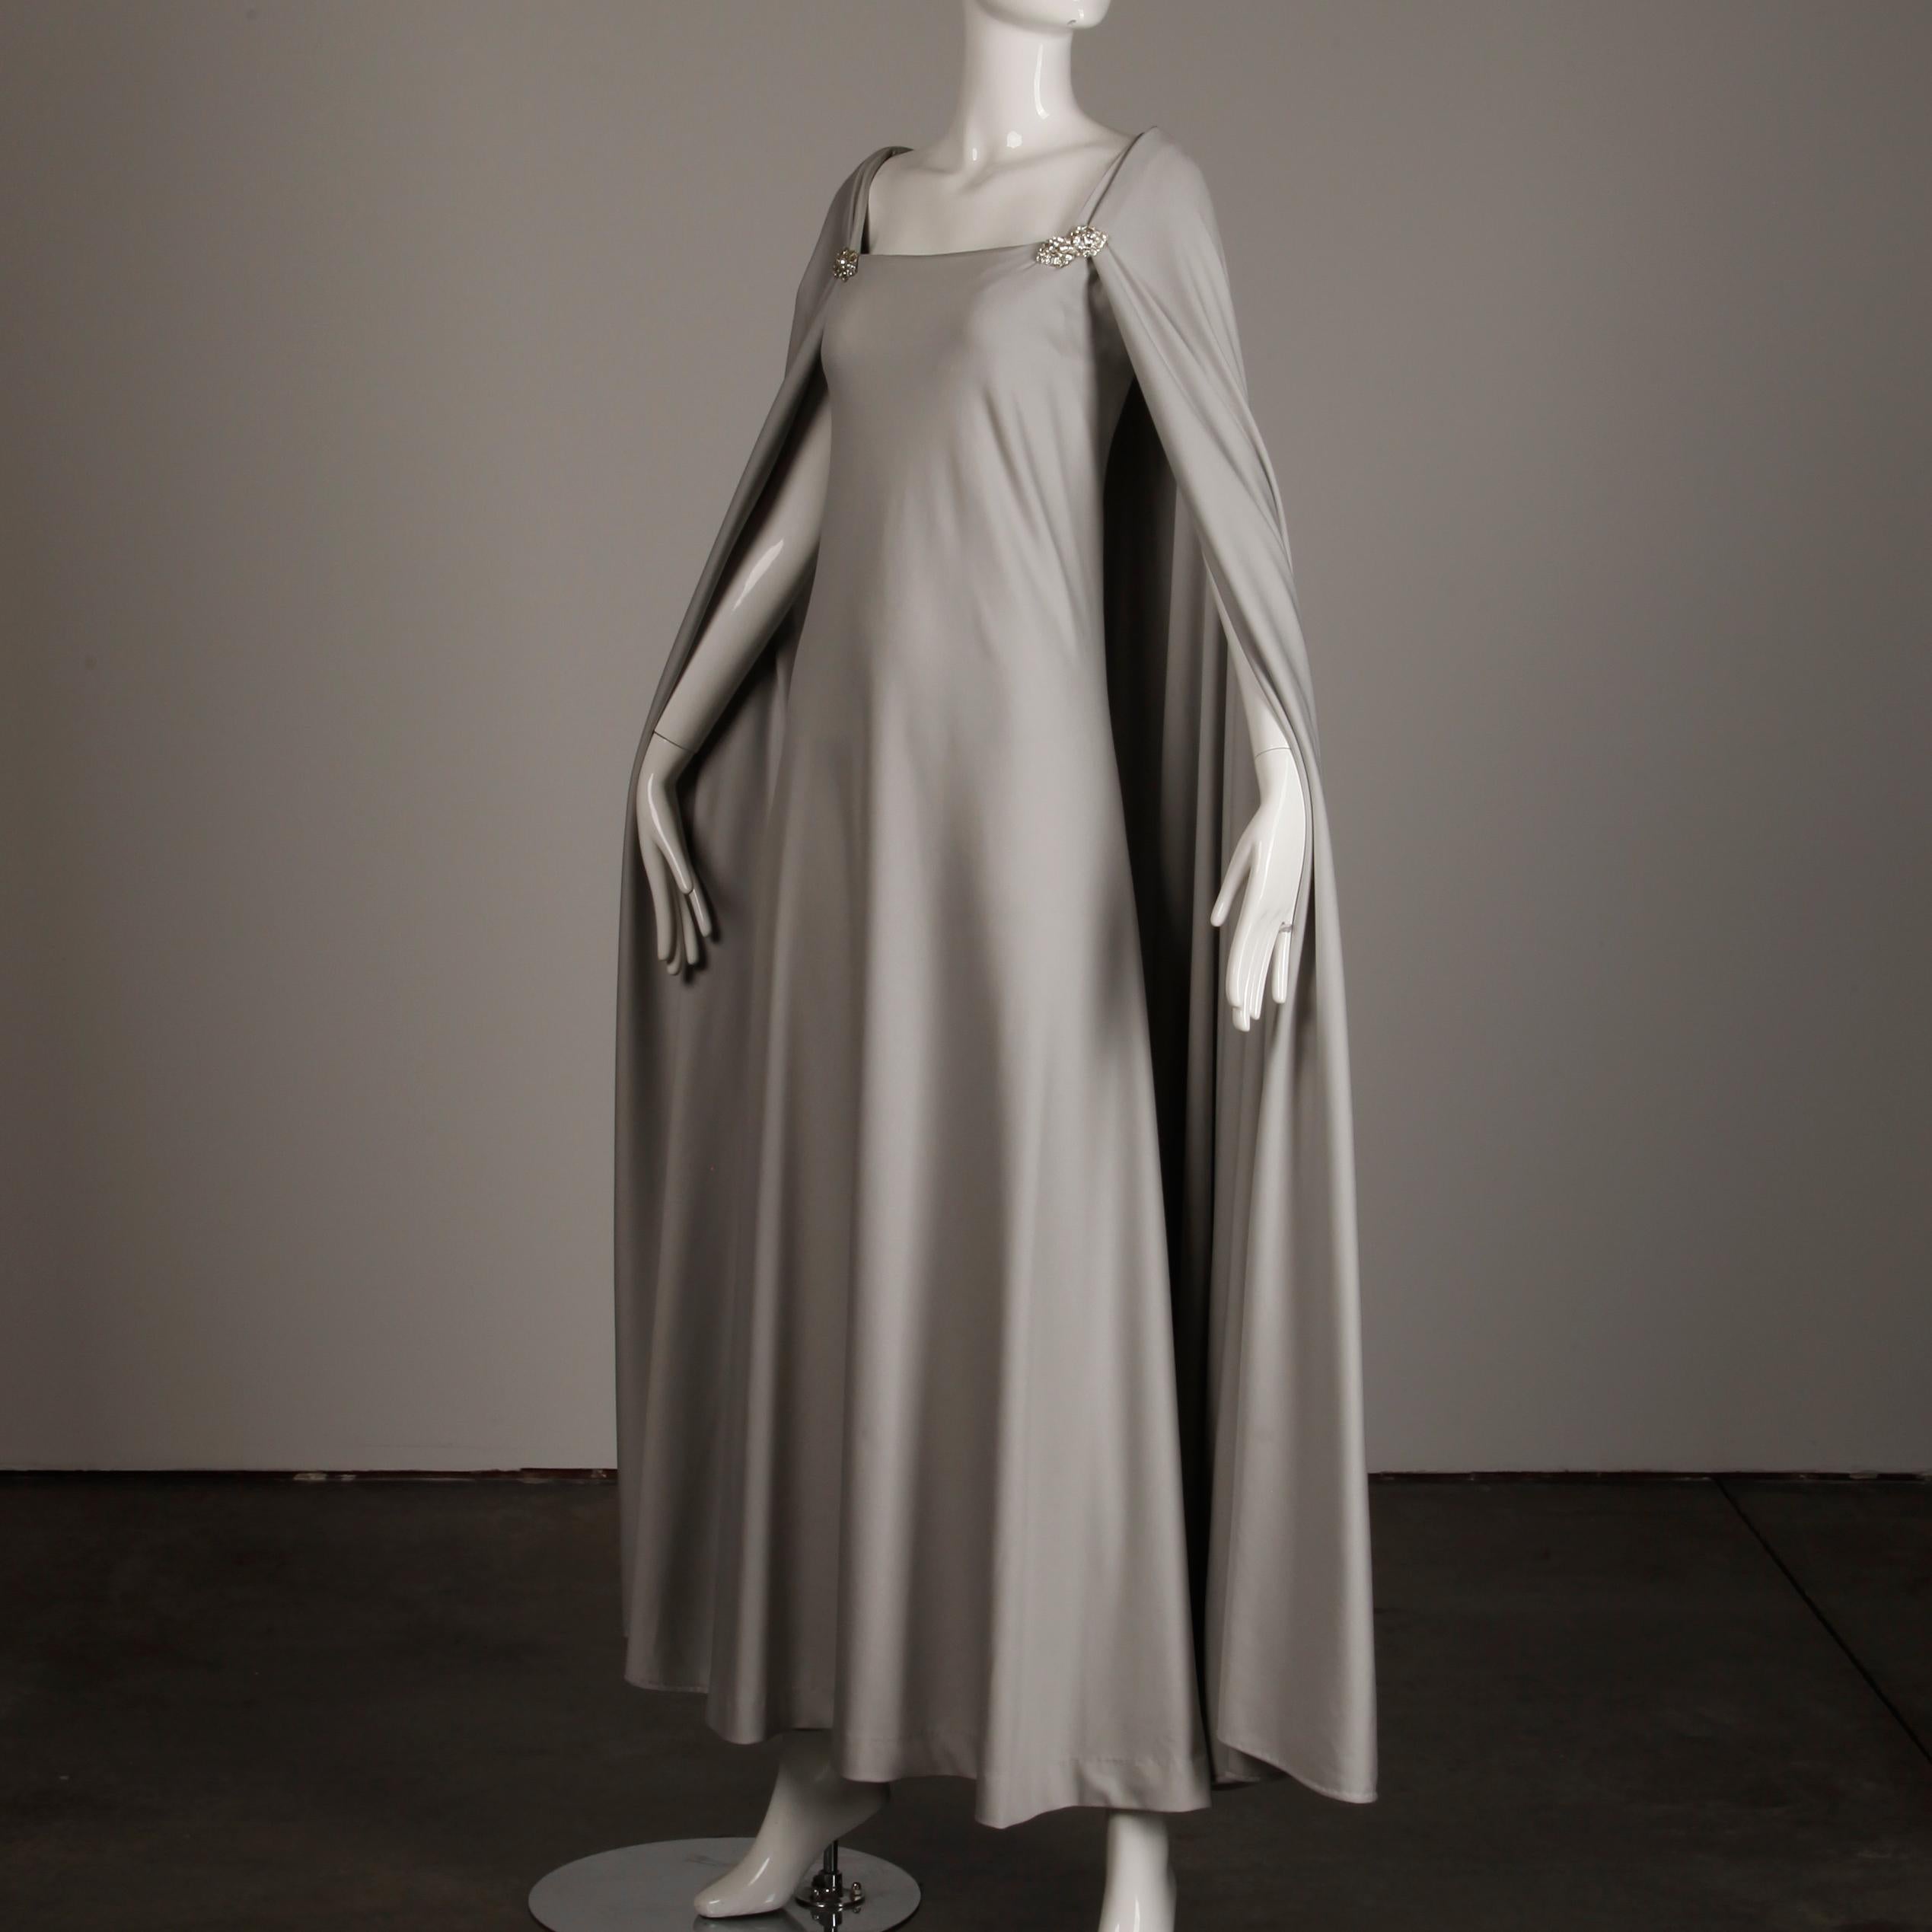 1970s Rona Vintage Gray Jersey Knit Dress/ Gown with Detachable Rhinestone Cape 1